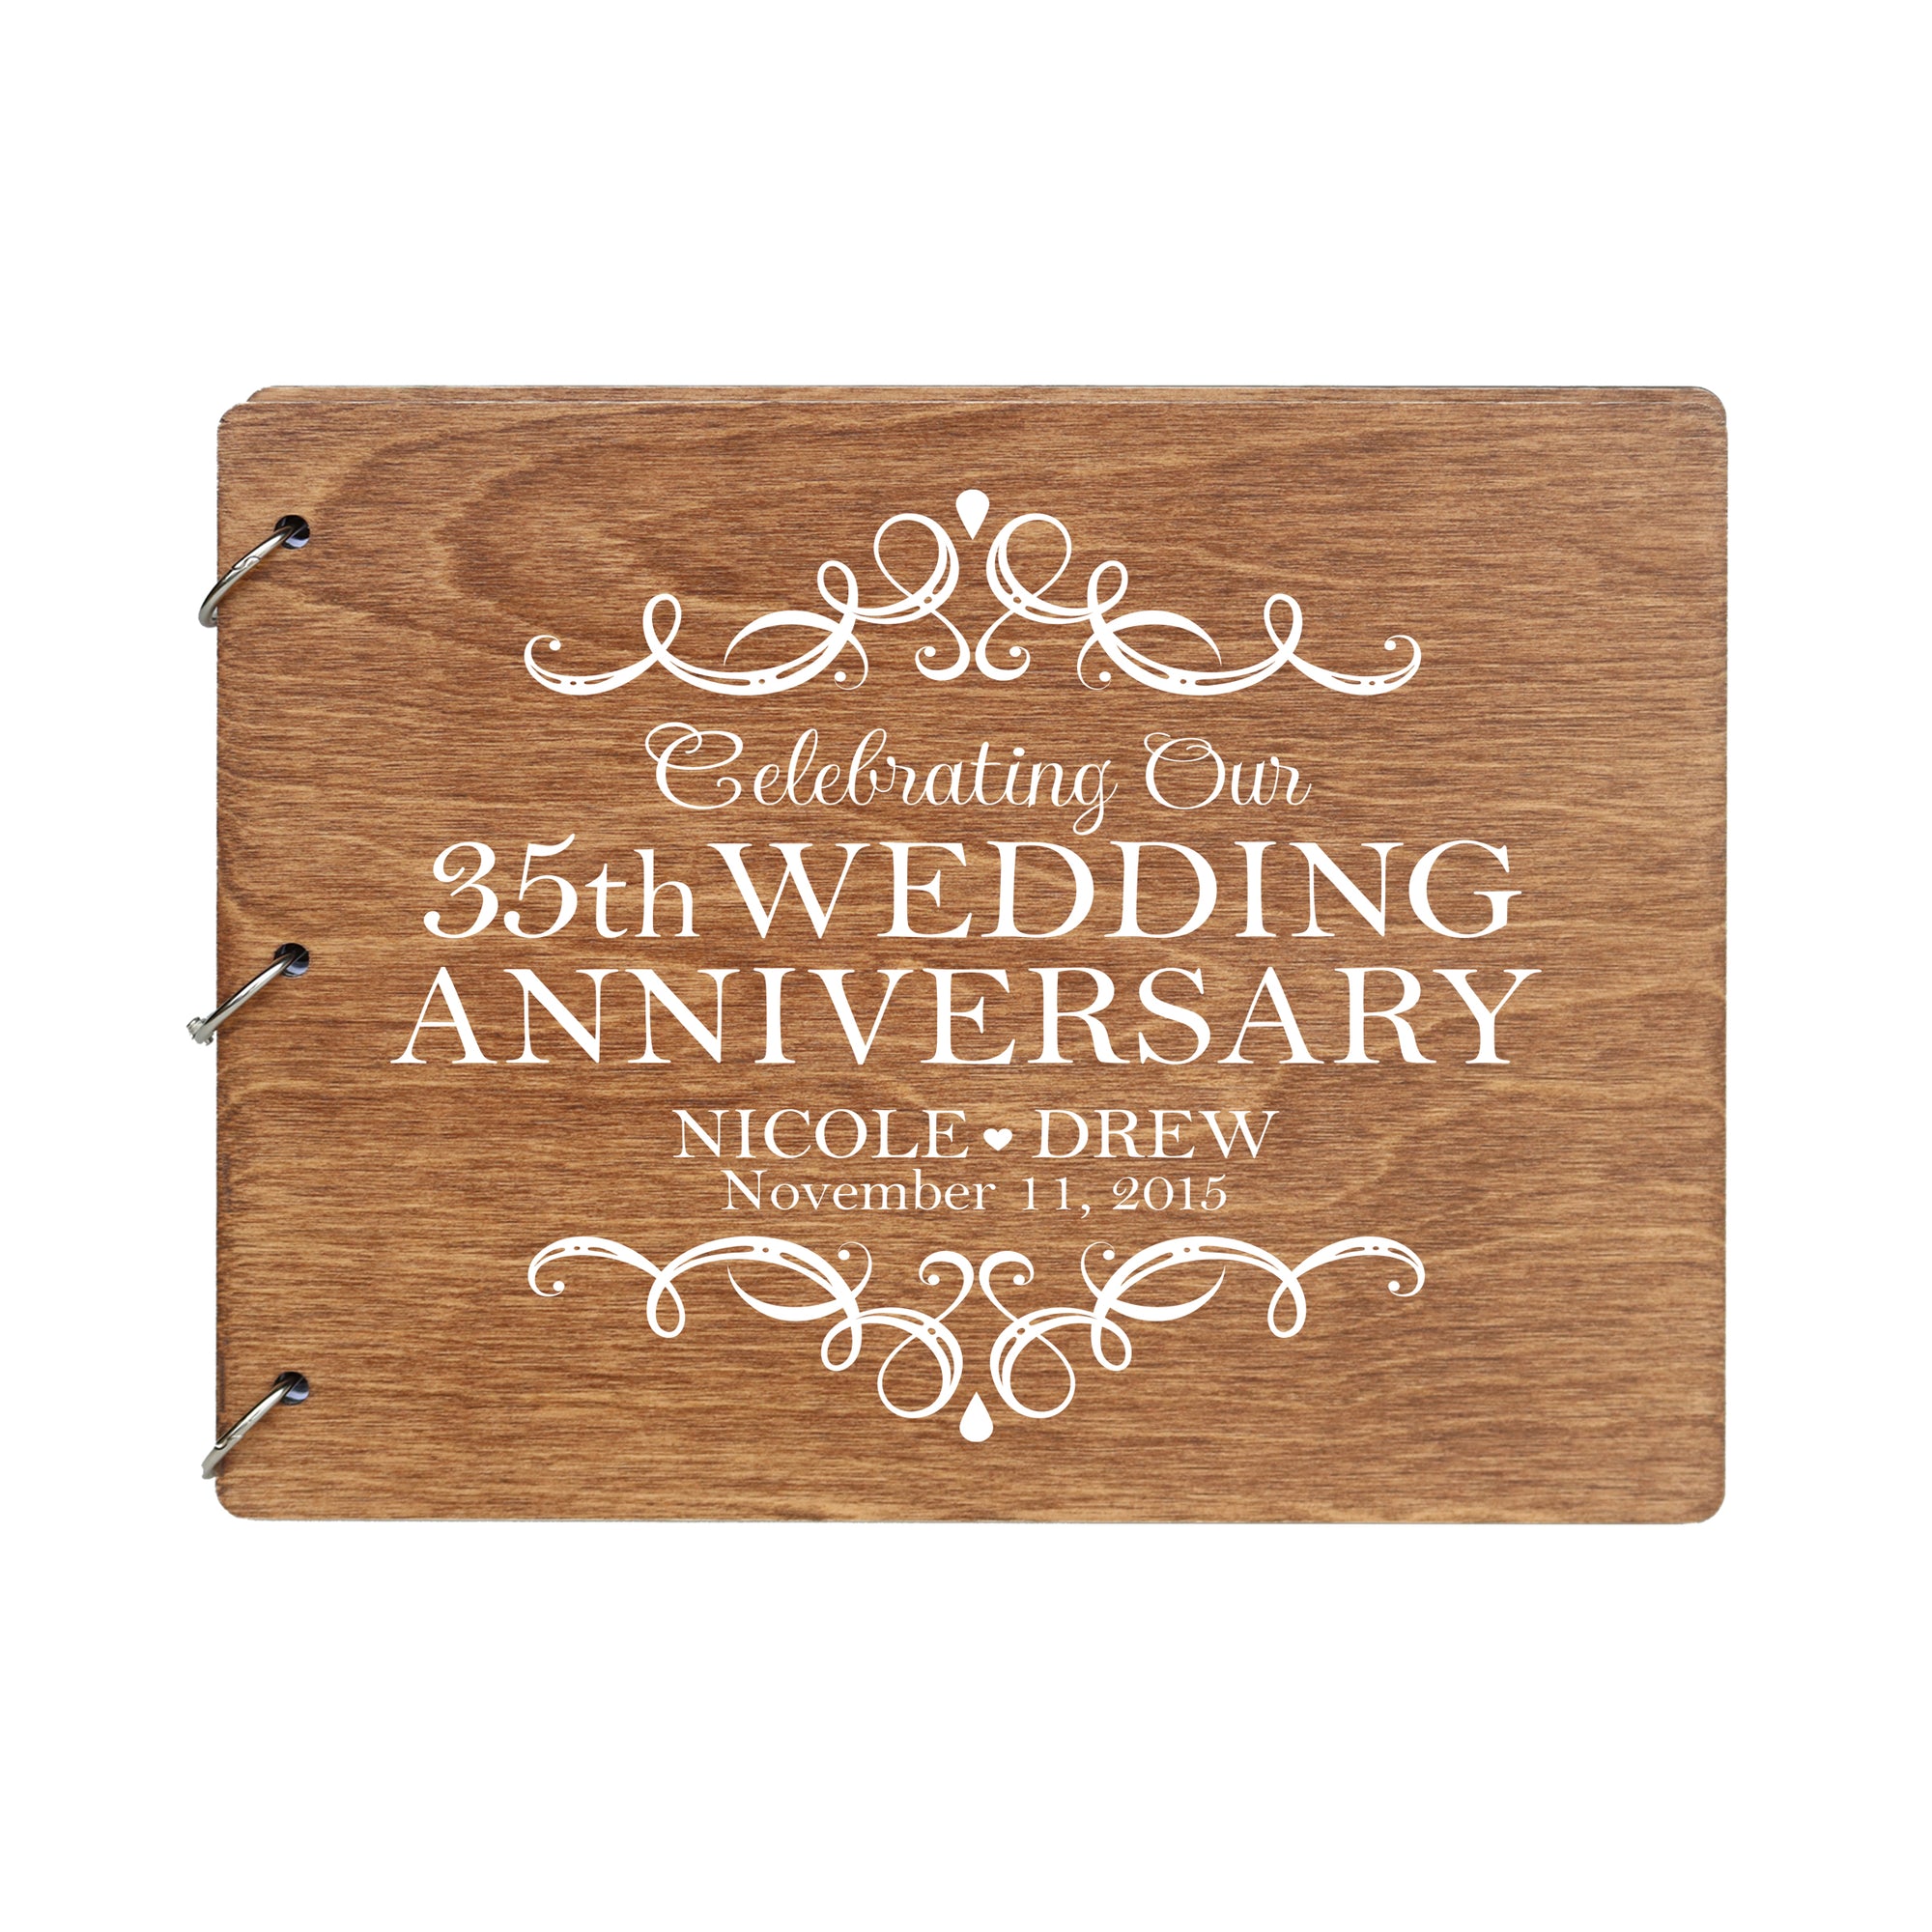 LifeSong Milestones Personalized Guestbook Sign for 35th Wedding Anniversary Gift Ideas